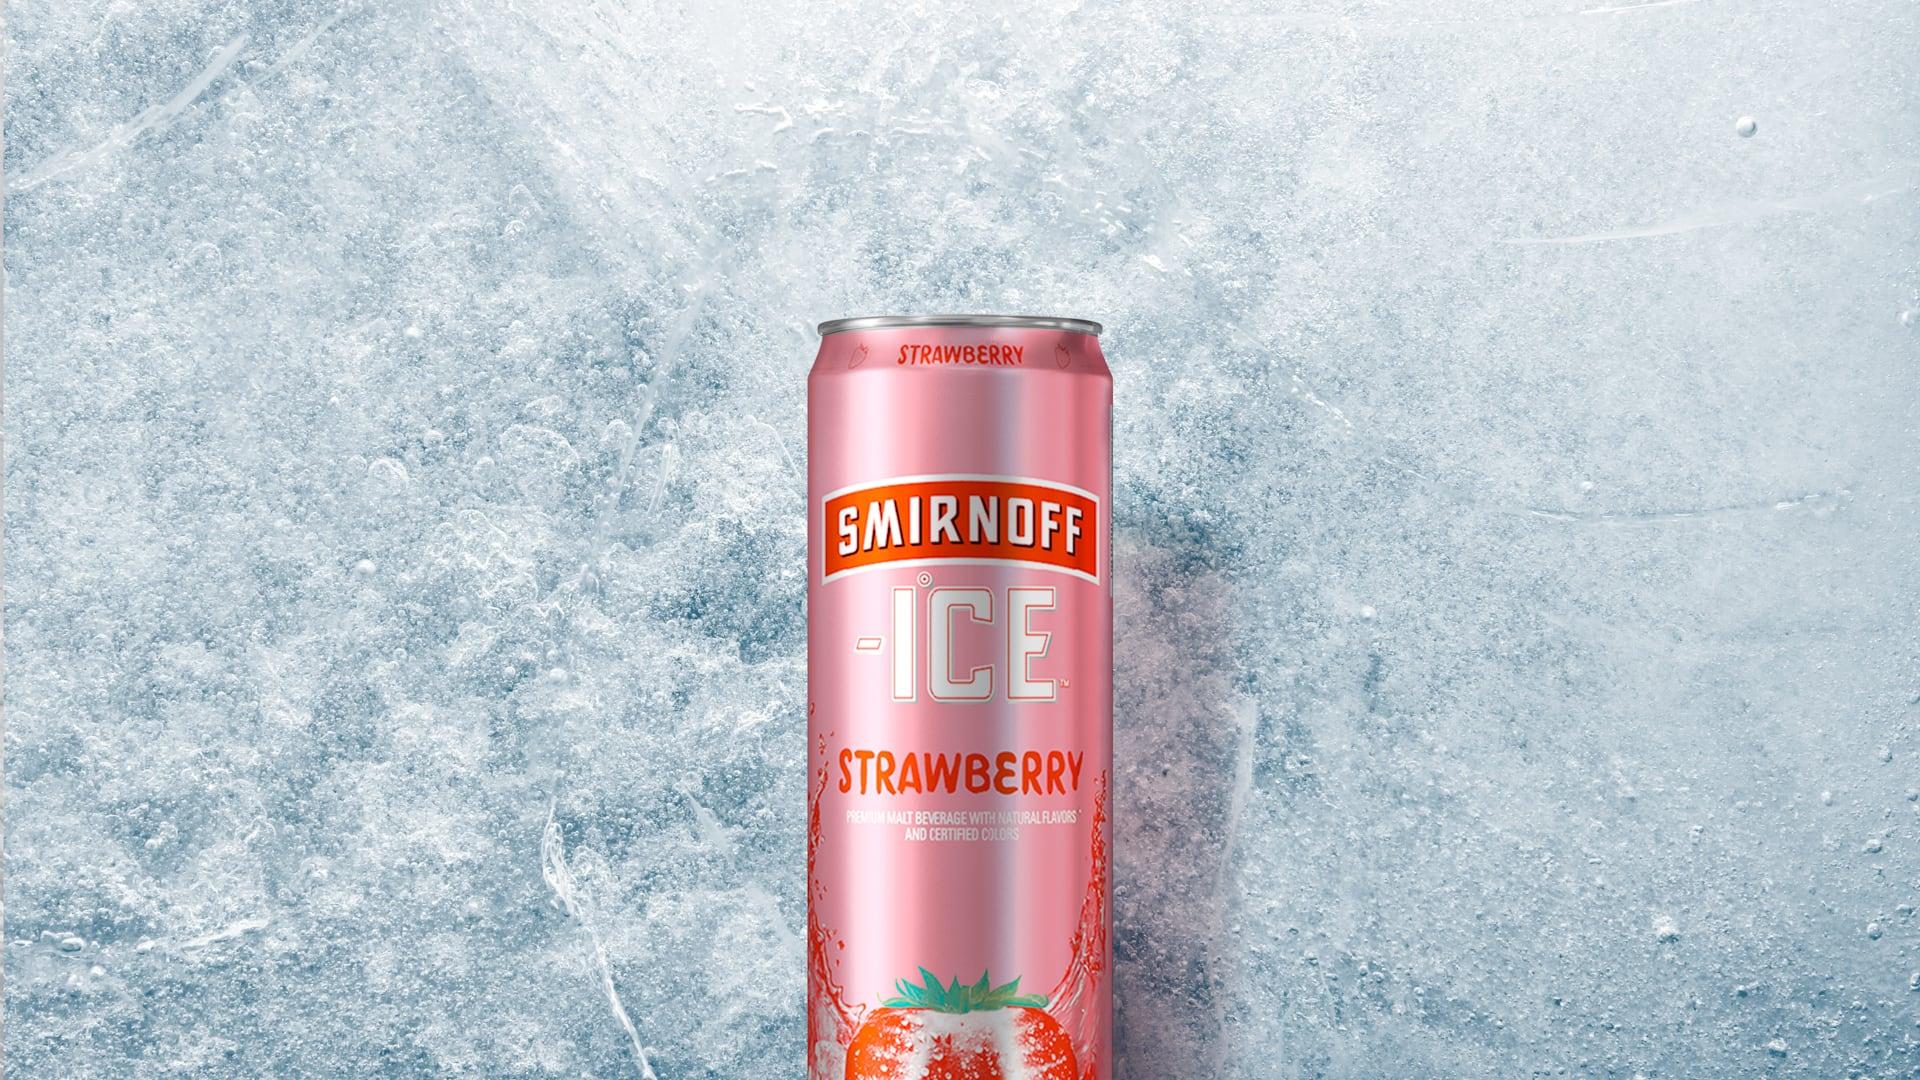 Smirnoff Ice Strawberry Can on a Icy background